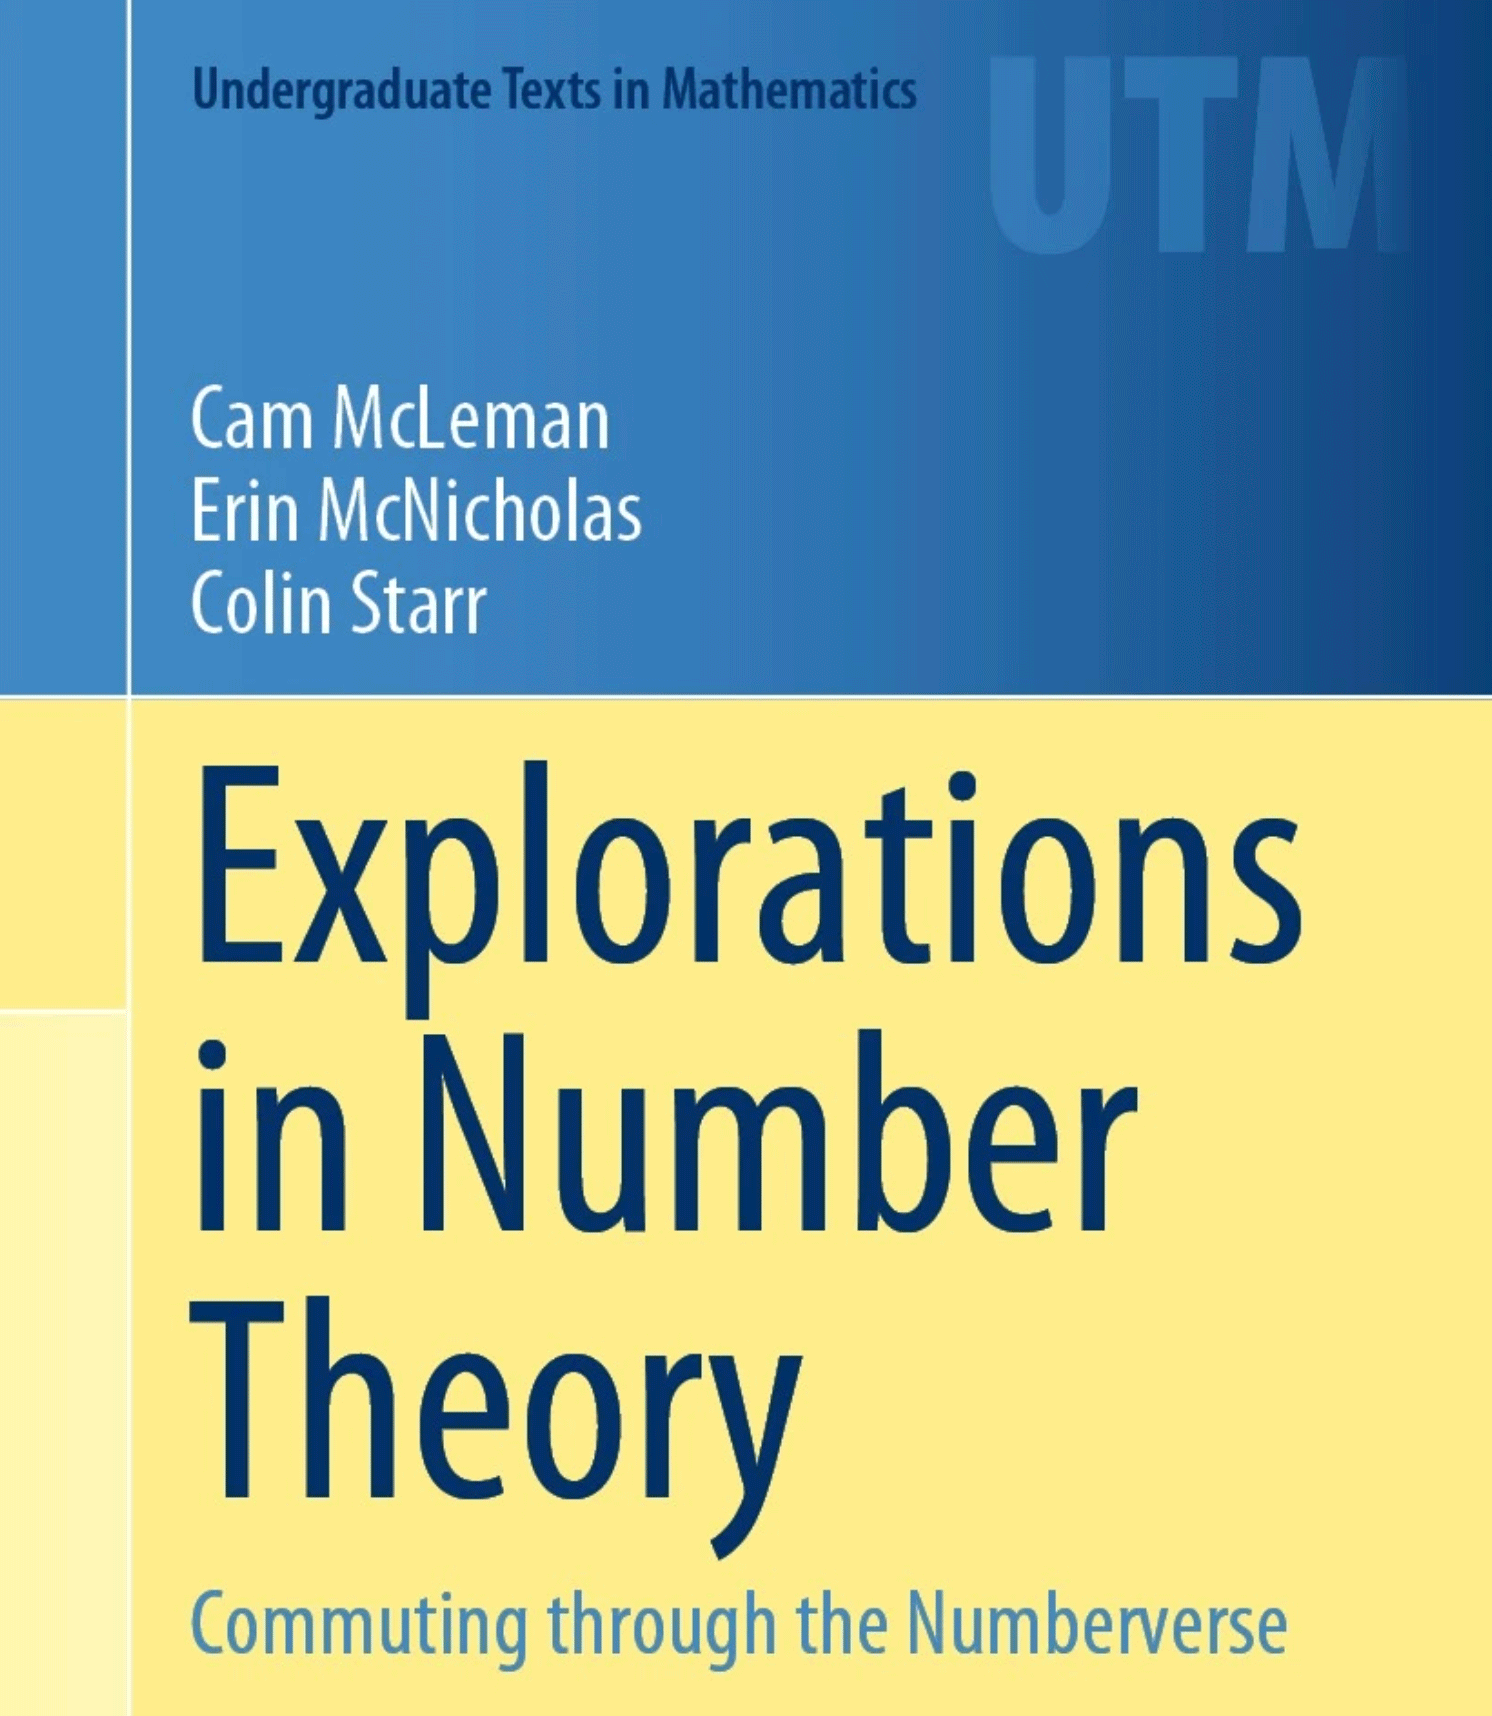 Explorations in Number Theory textbook cover